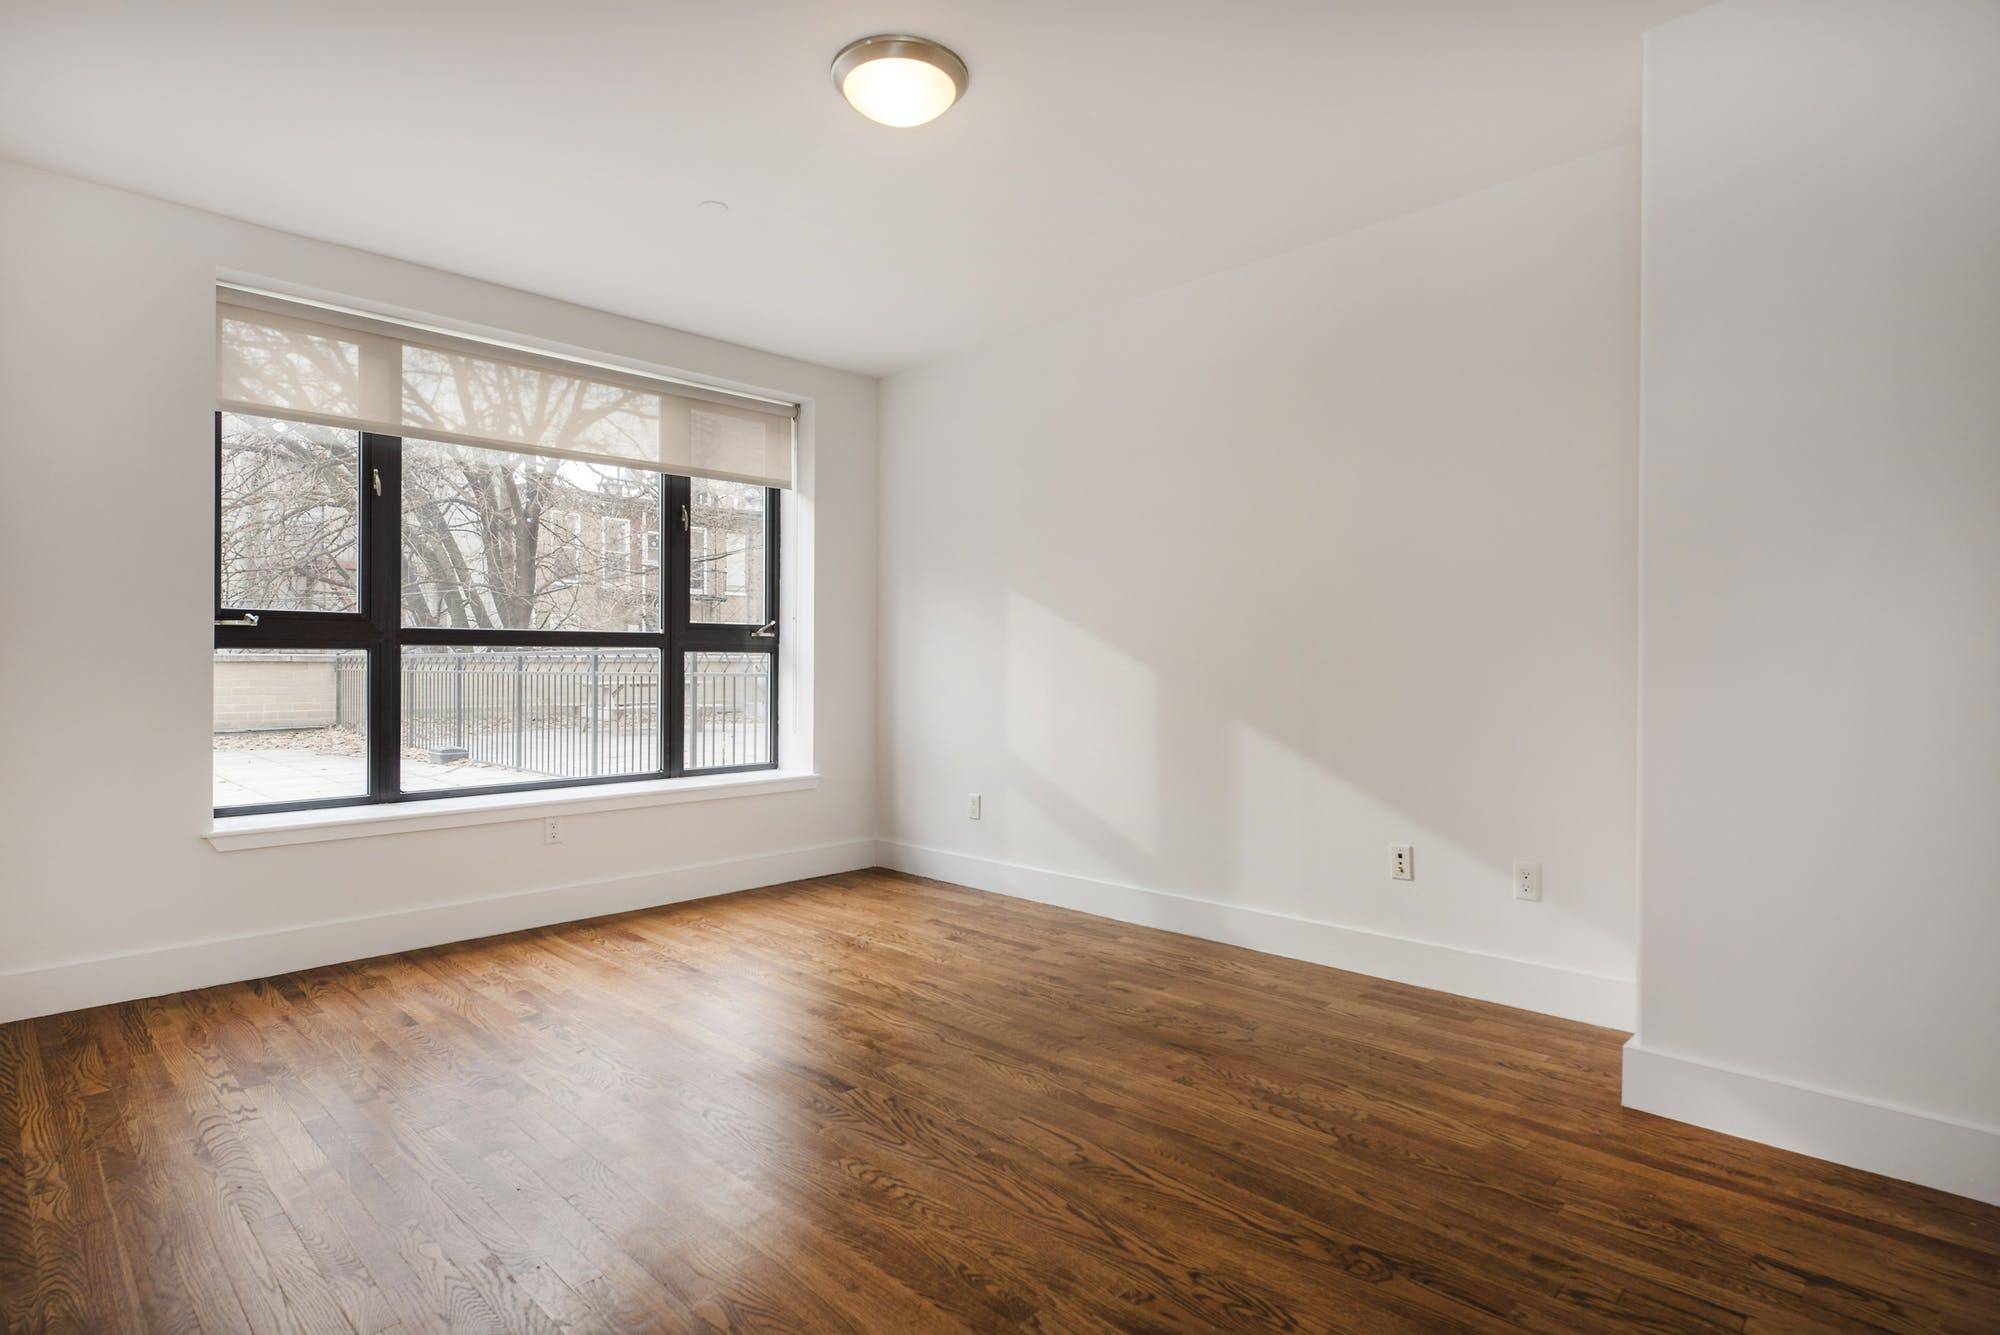 Welcome to 80 Meserole Street 80 Meserole Street is an incredible opportunity to reside in one of the most sought after neighborhoods in Brooklyn.